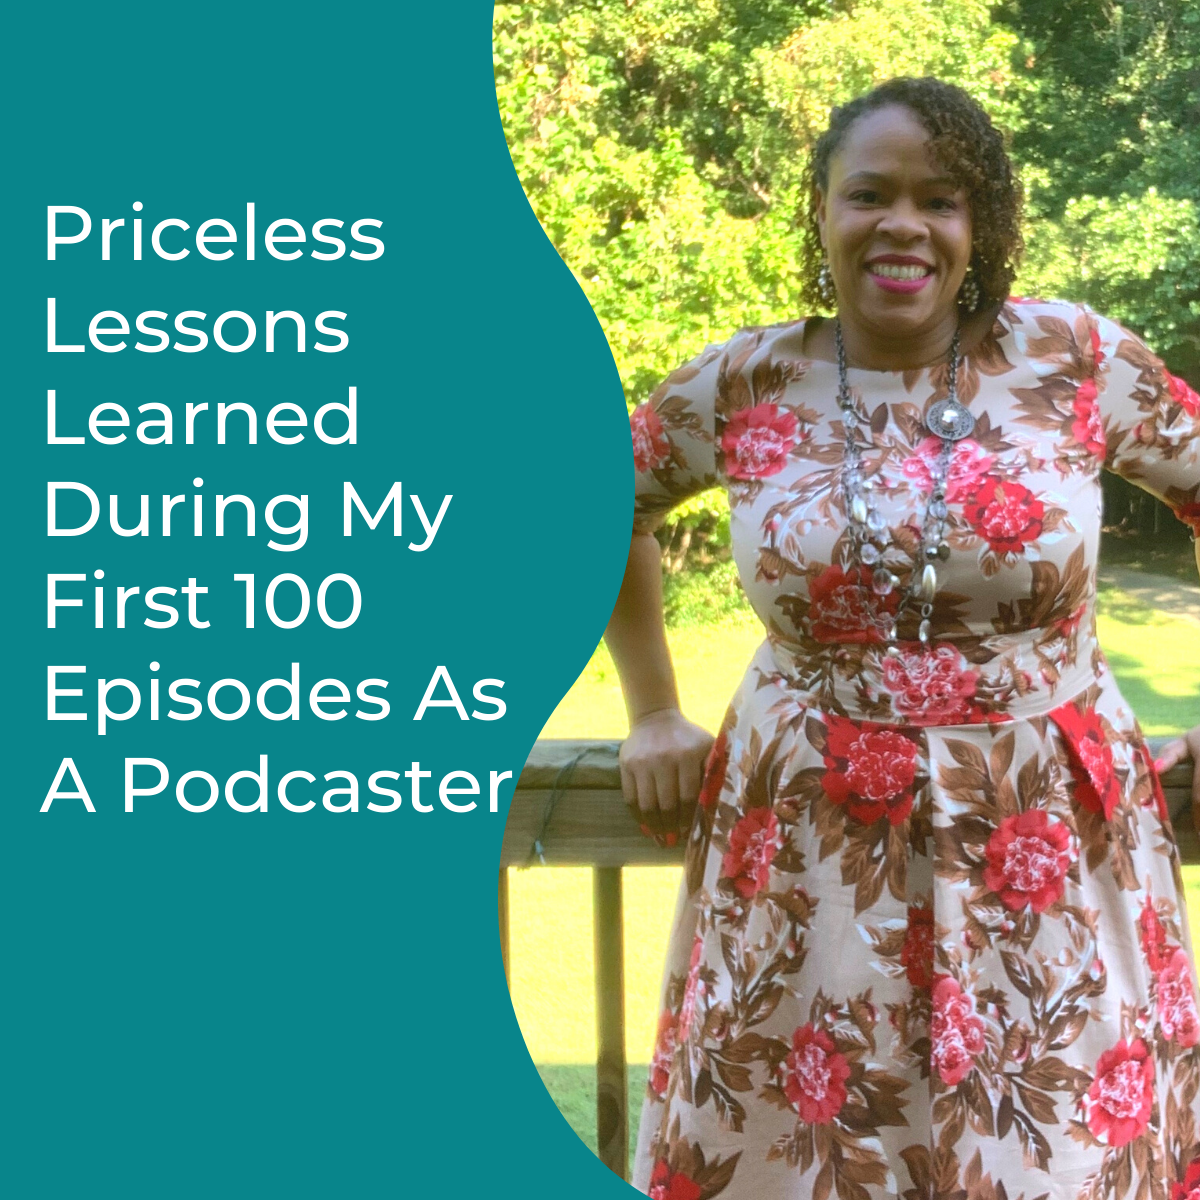 You are currently viewing Priceless Lessons Learned During My First 100 Episodes As A Podcaster